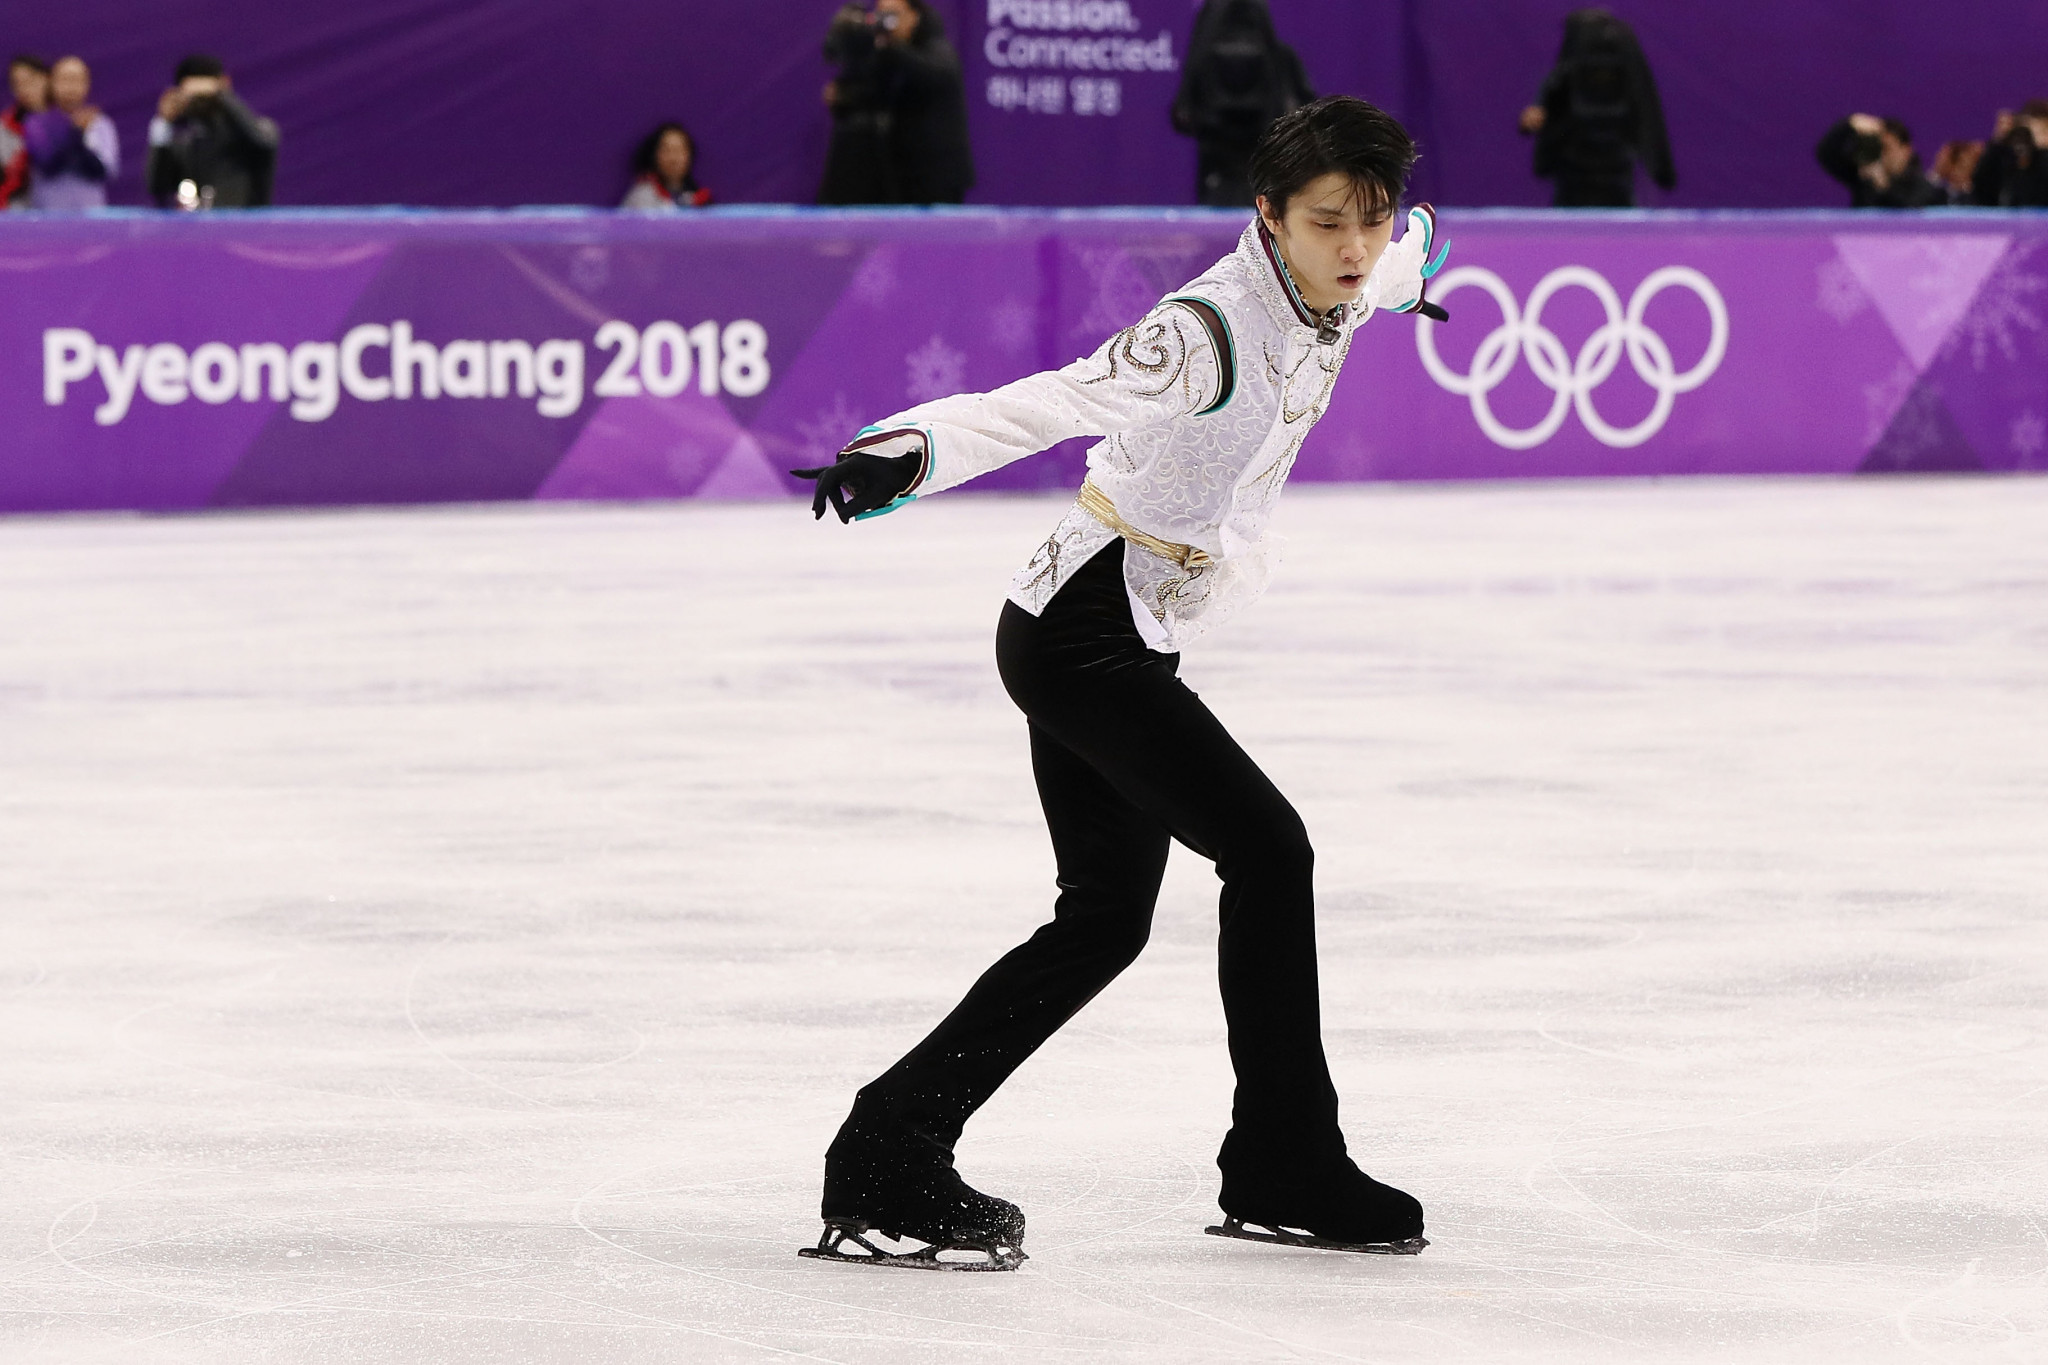 History maker Hanyu set to skate for first time since winning second Olympic gold medal at Pyeongchang 2018 